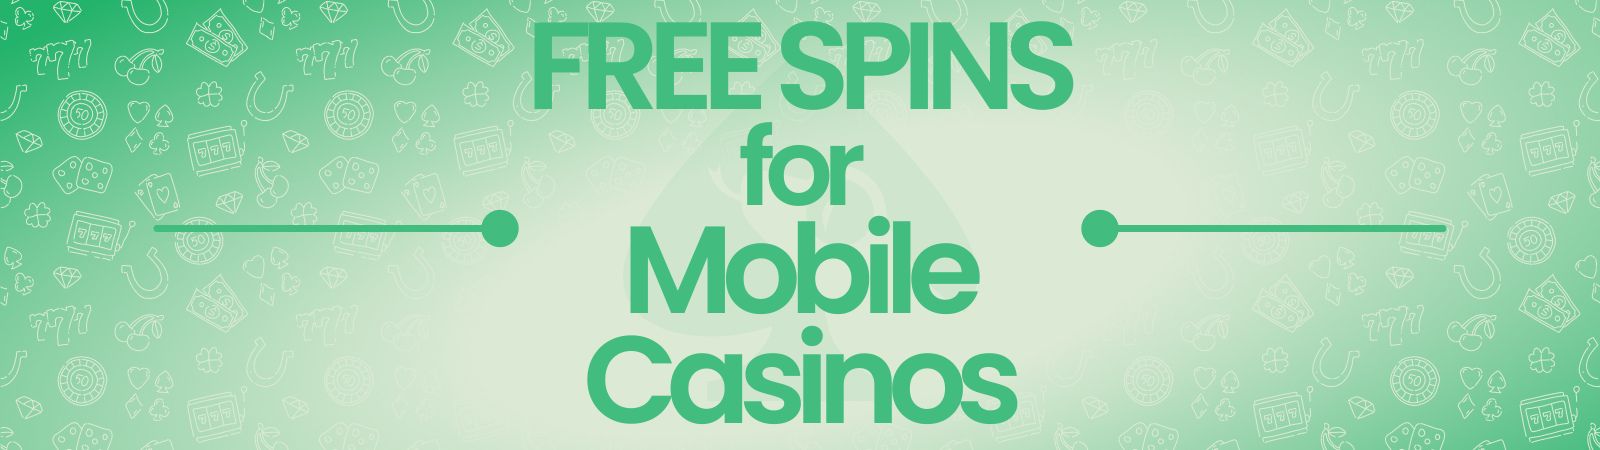 mobile casino free spins uk